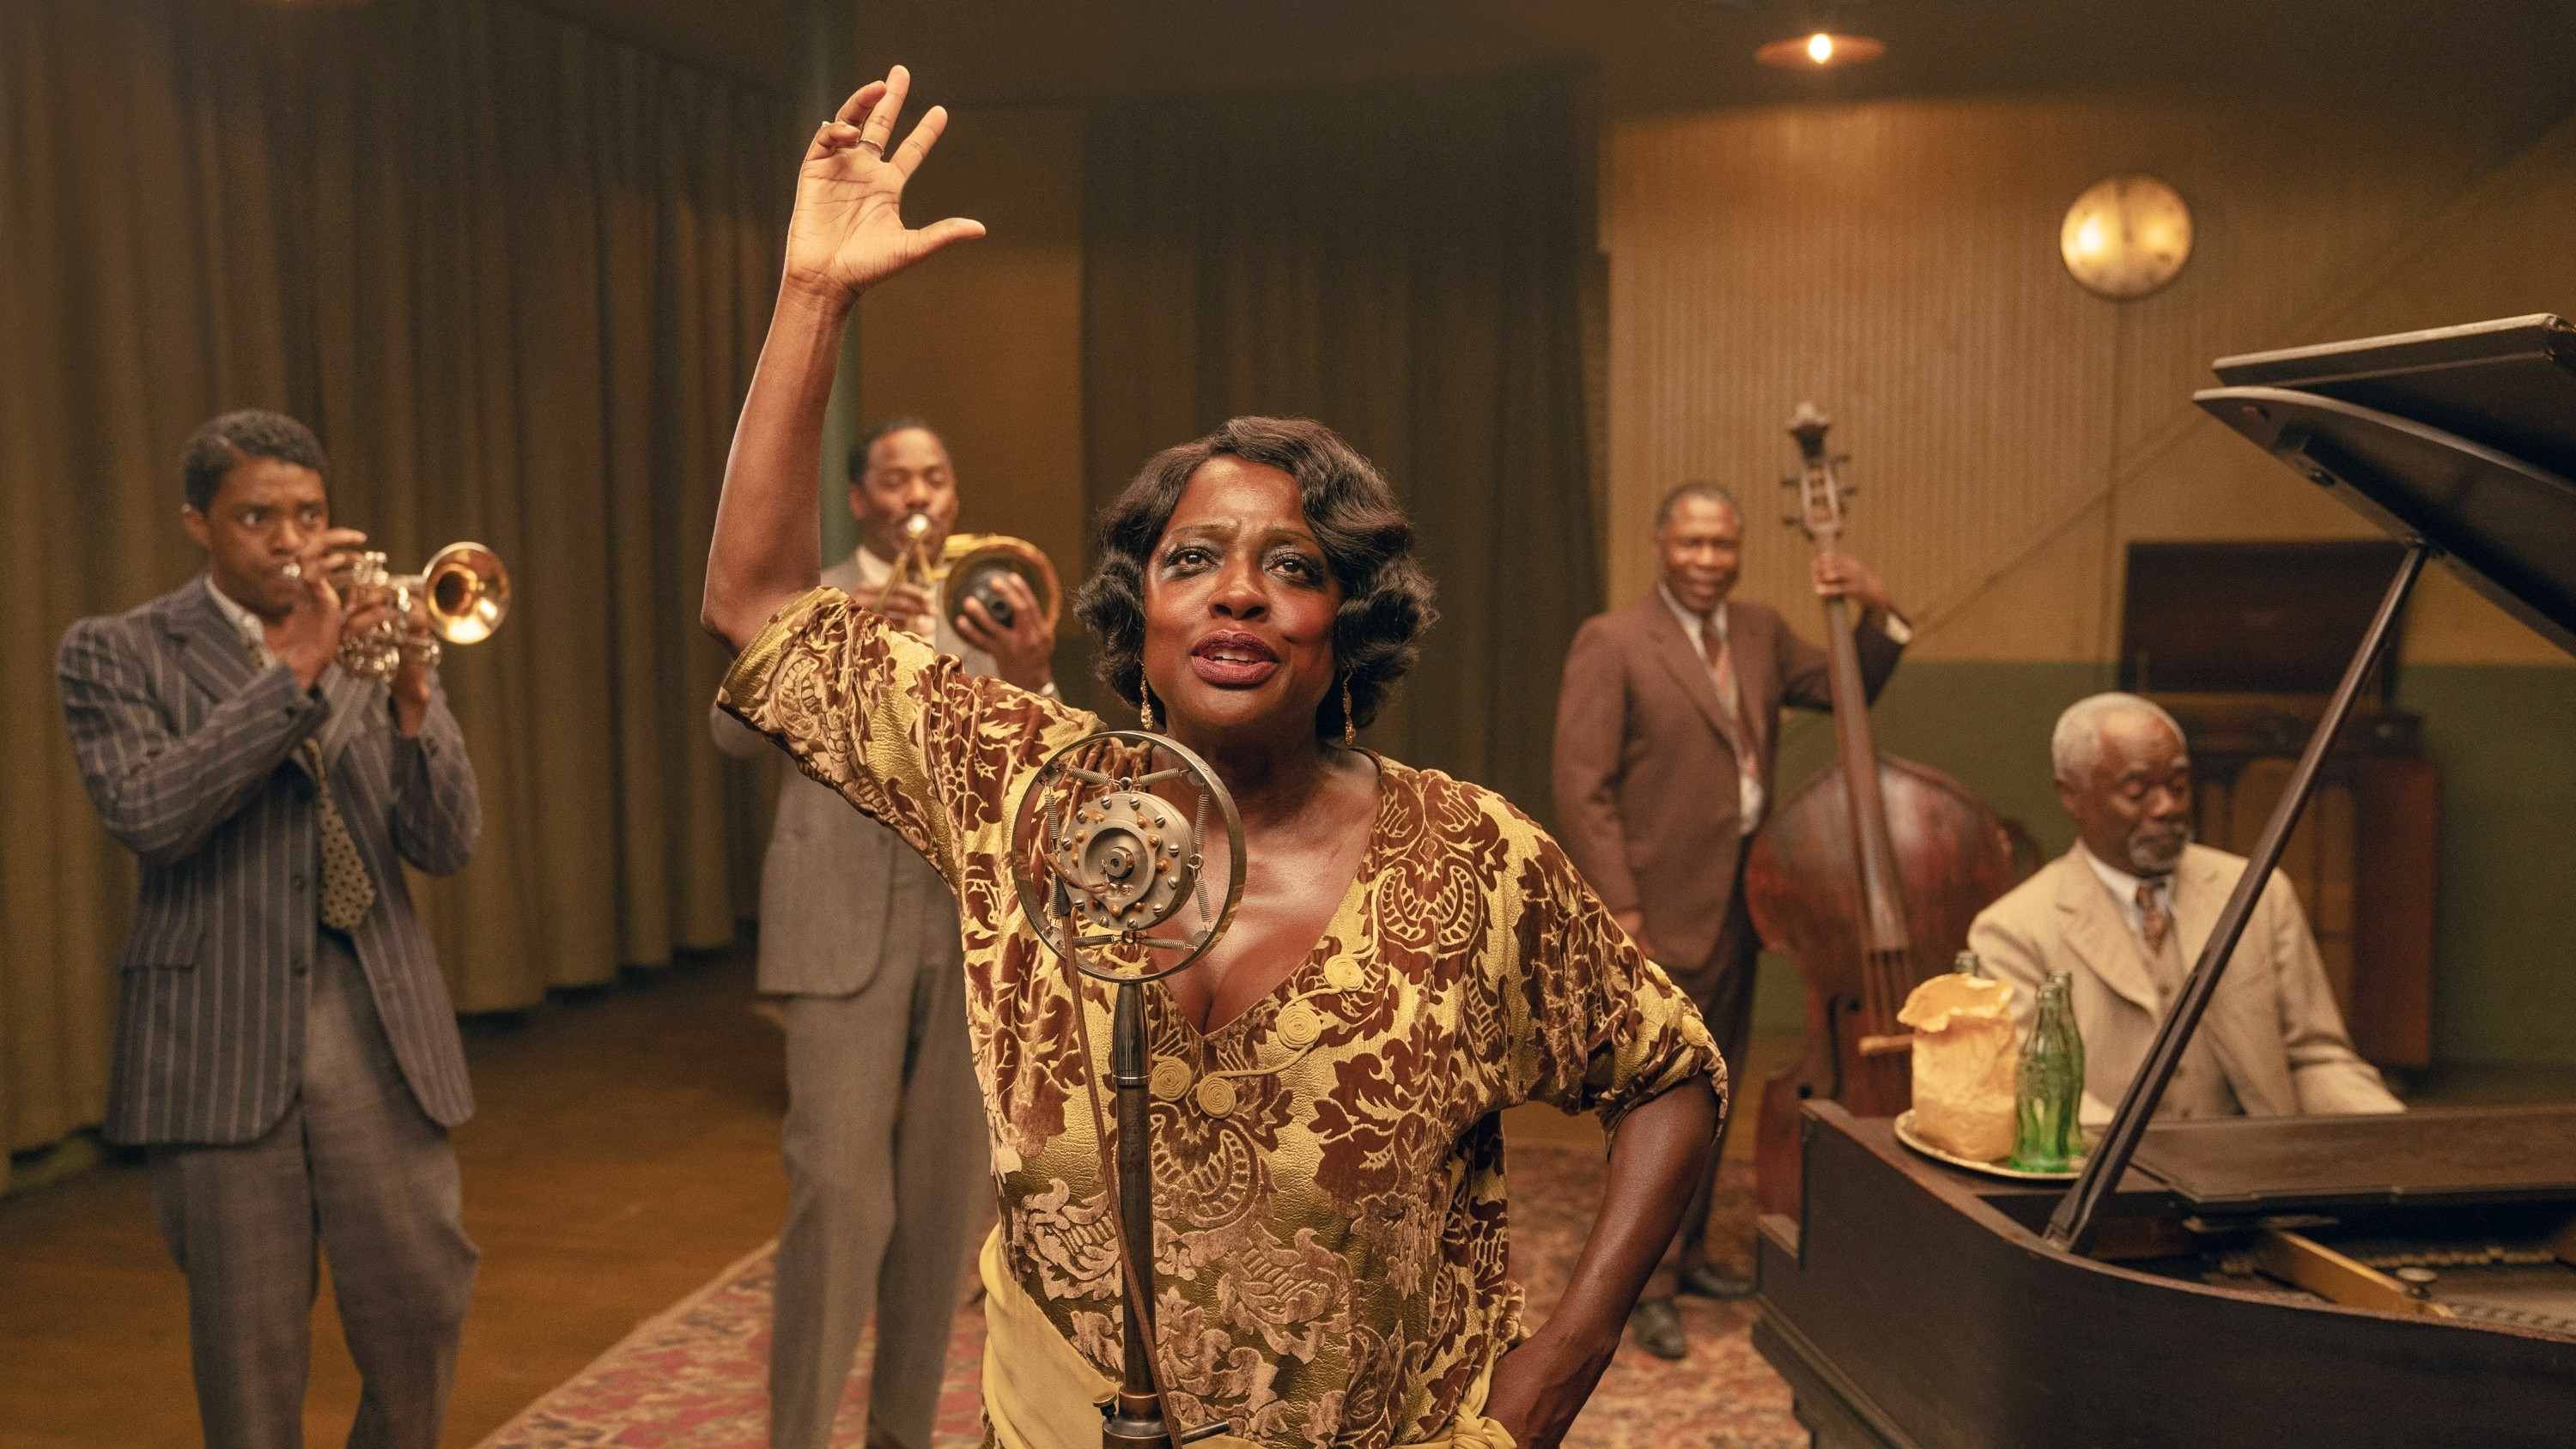 Viola Davis as Ma Rainey in patterned dress singing with jazz band members playing instruments in vintage room